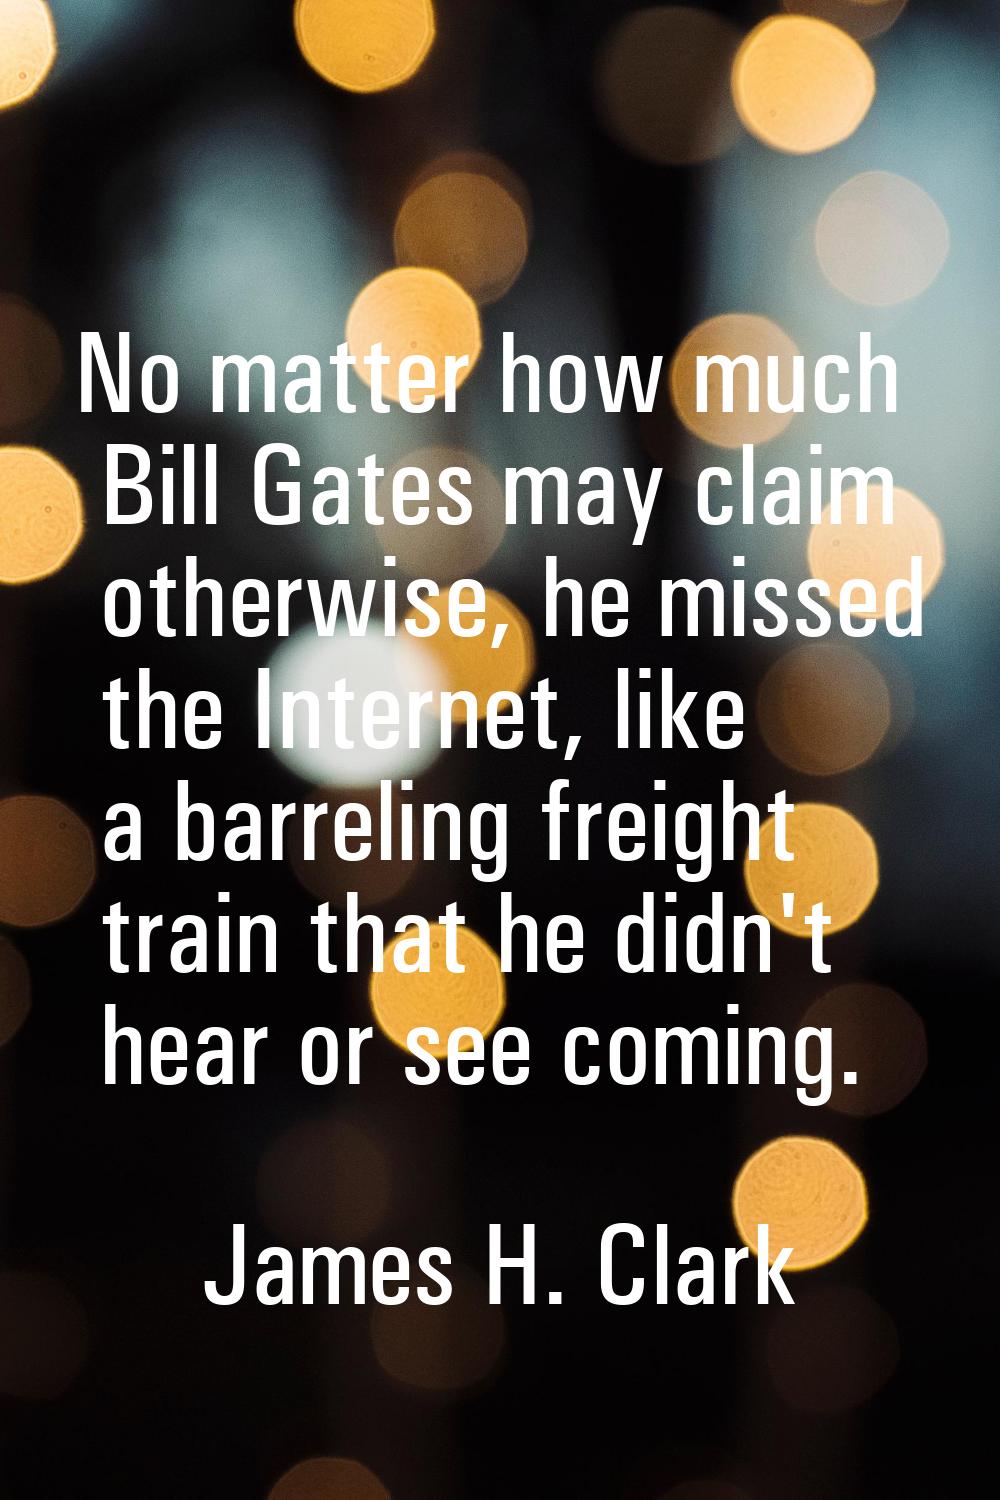 No matter how much Bill Gates may claim otherwise, he missed the Internet, like a barreling freight